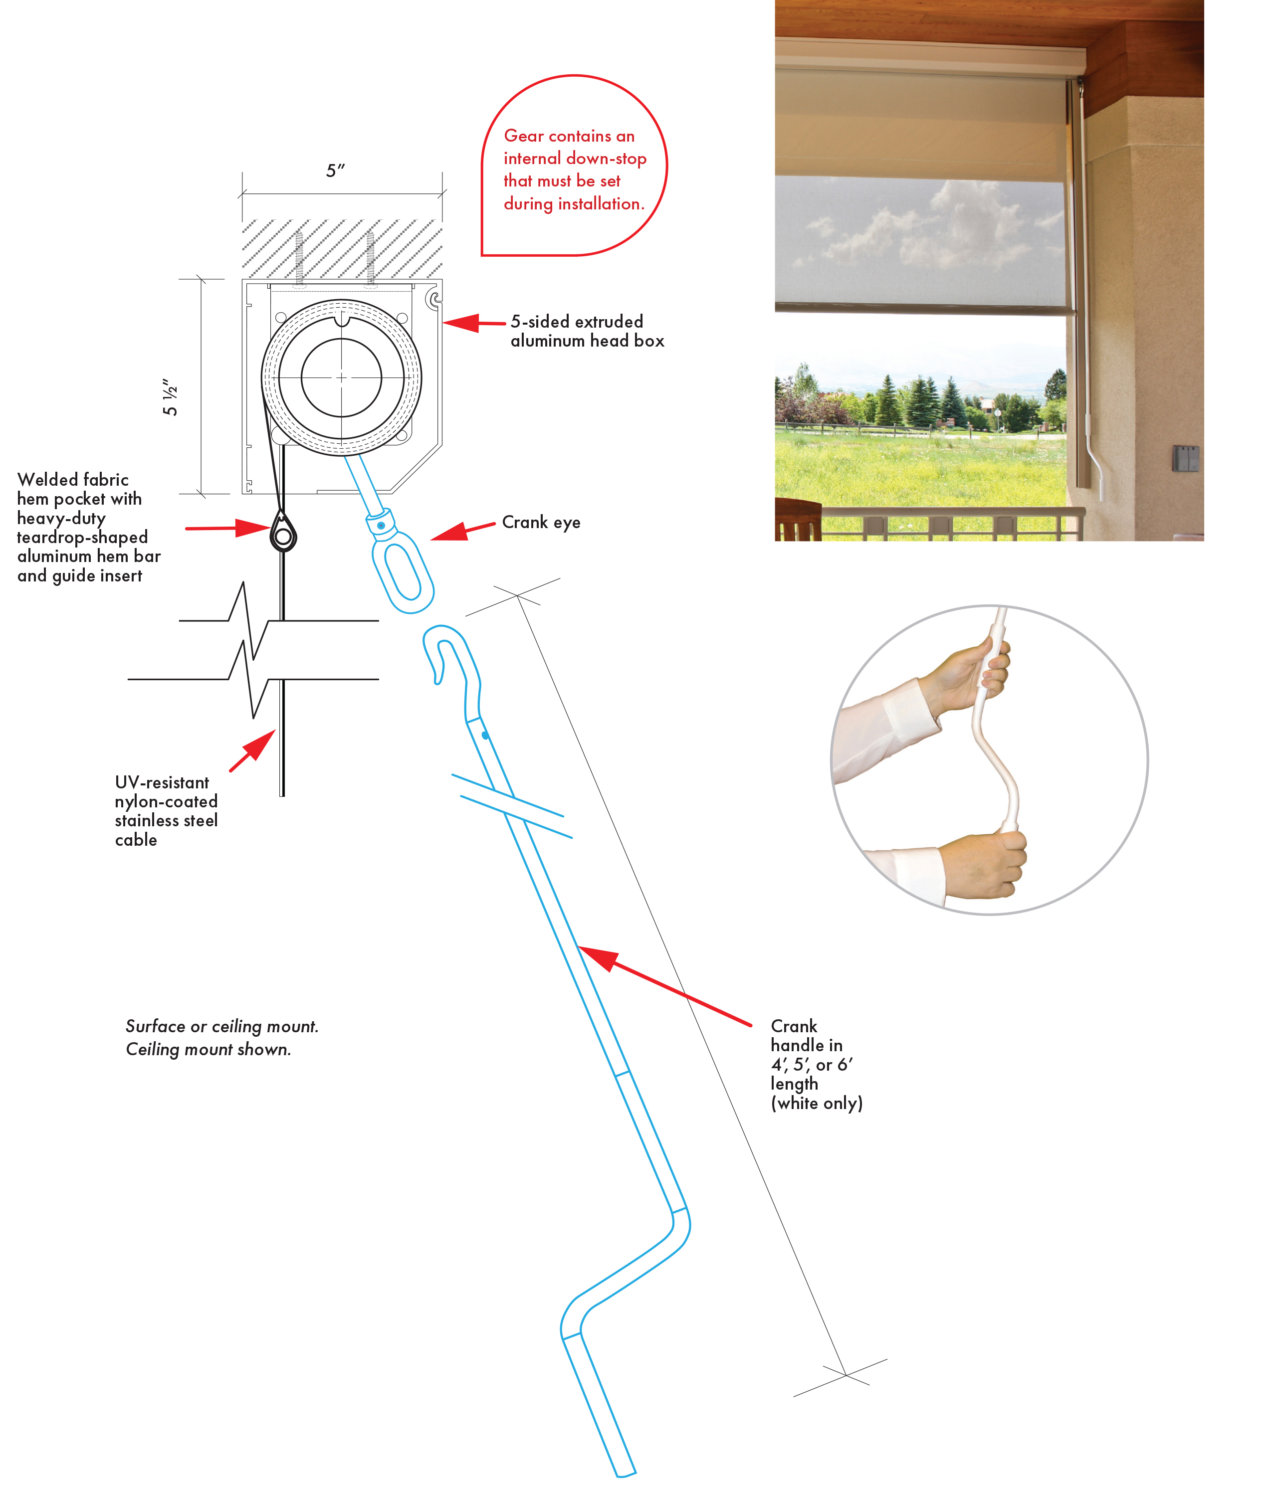 Insolroll Patio Shade with crank operation photo and diagram